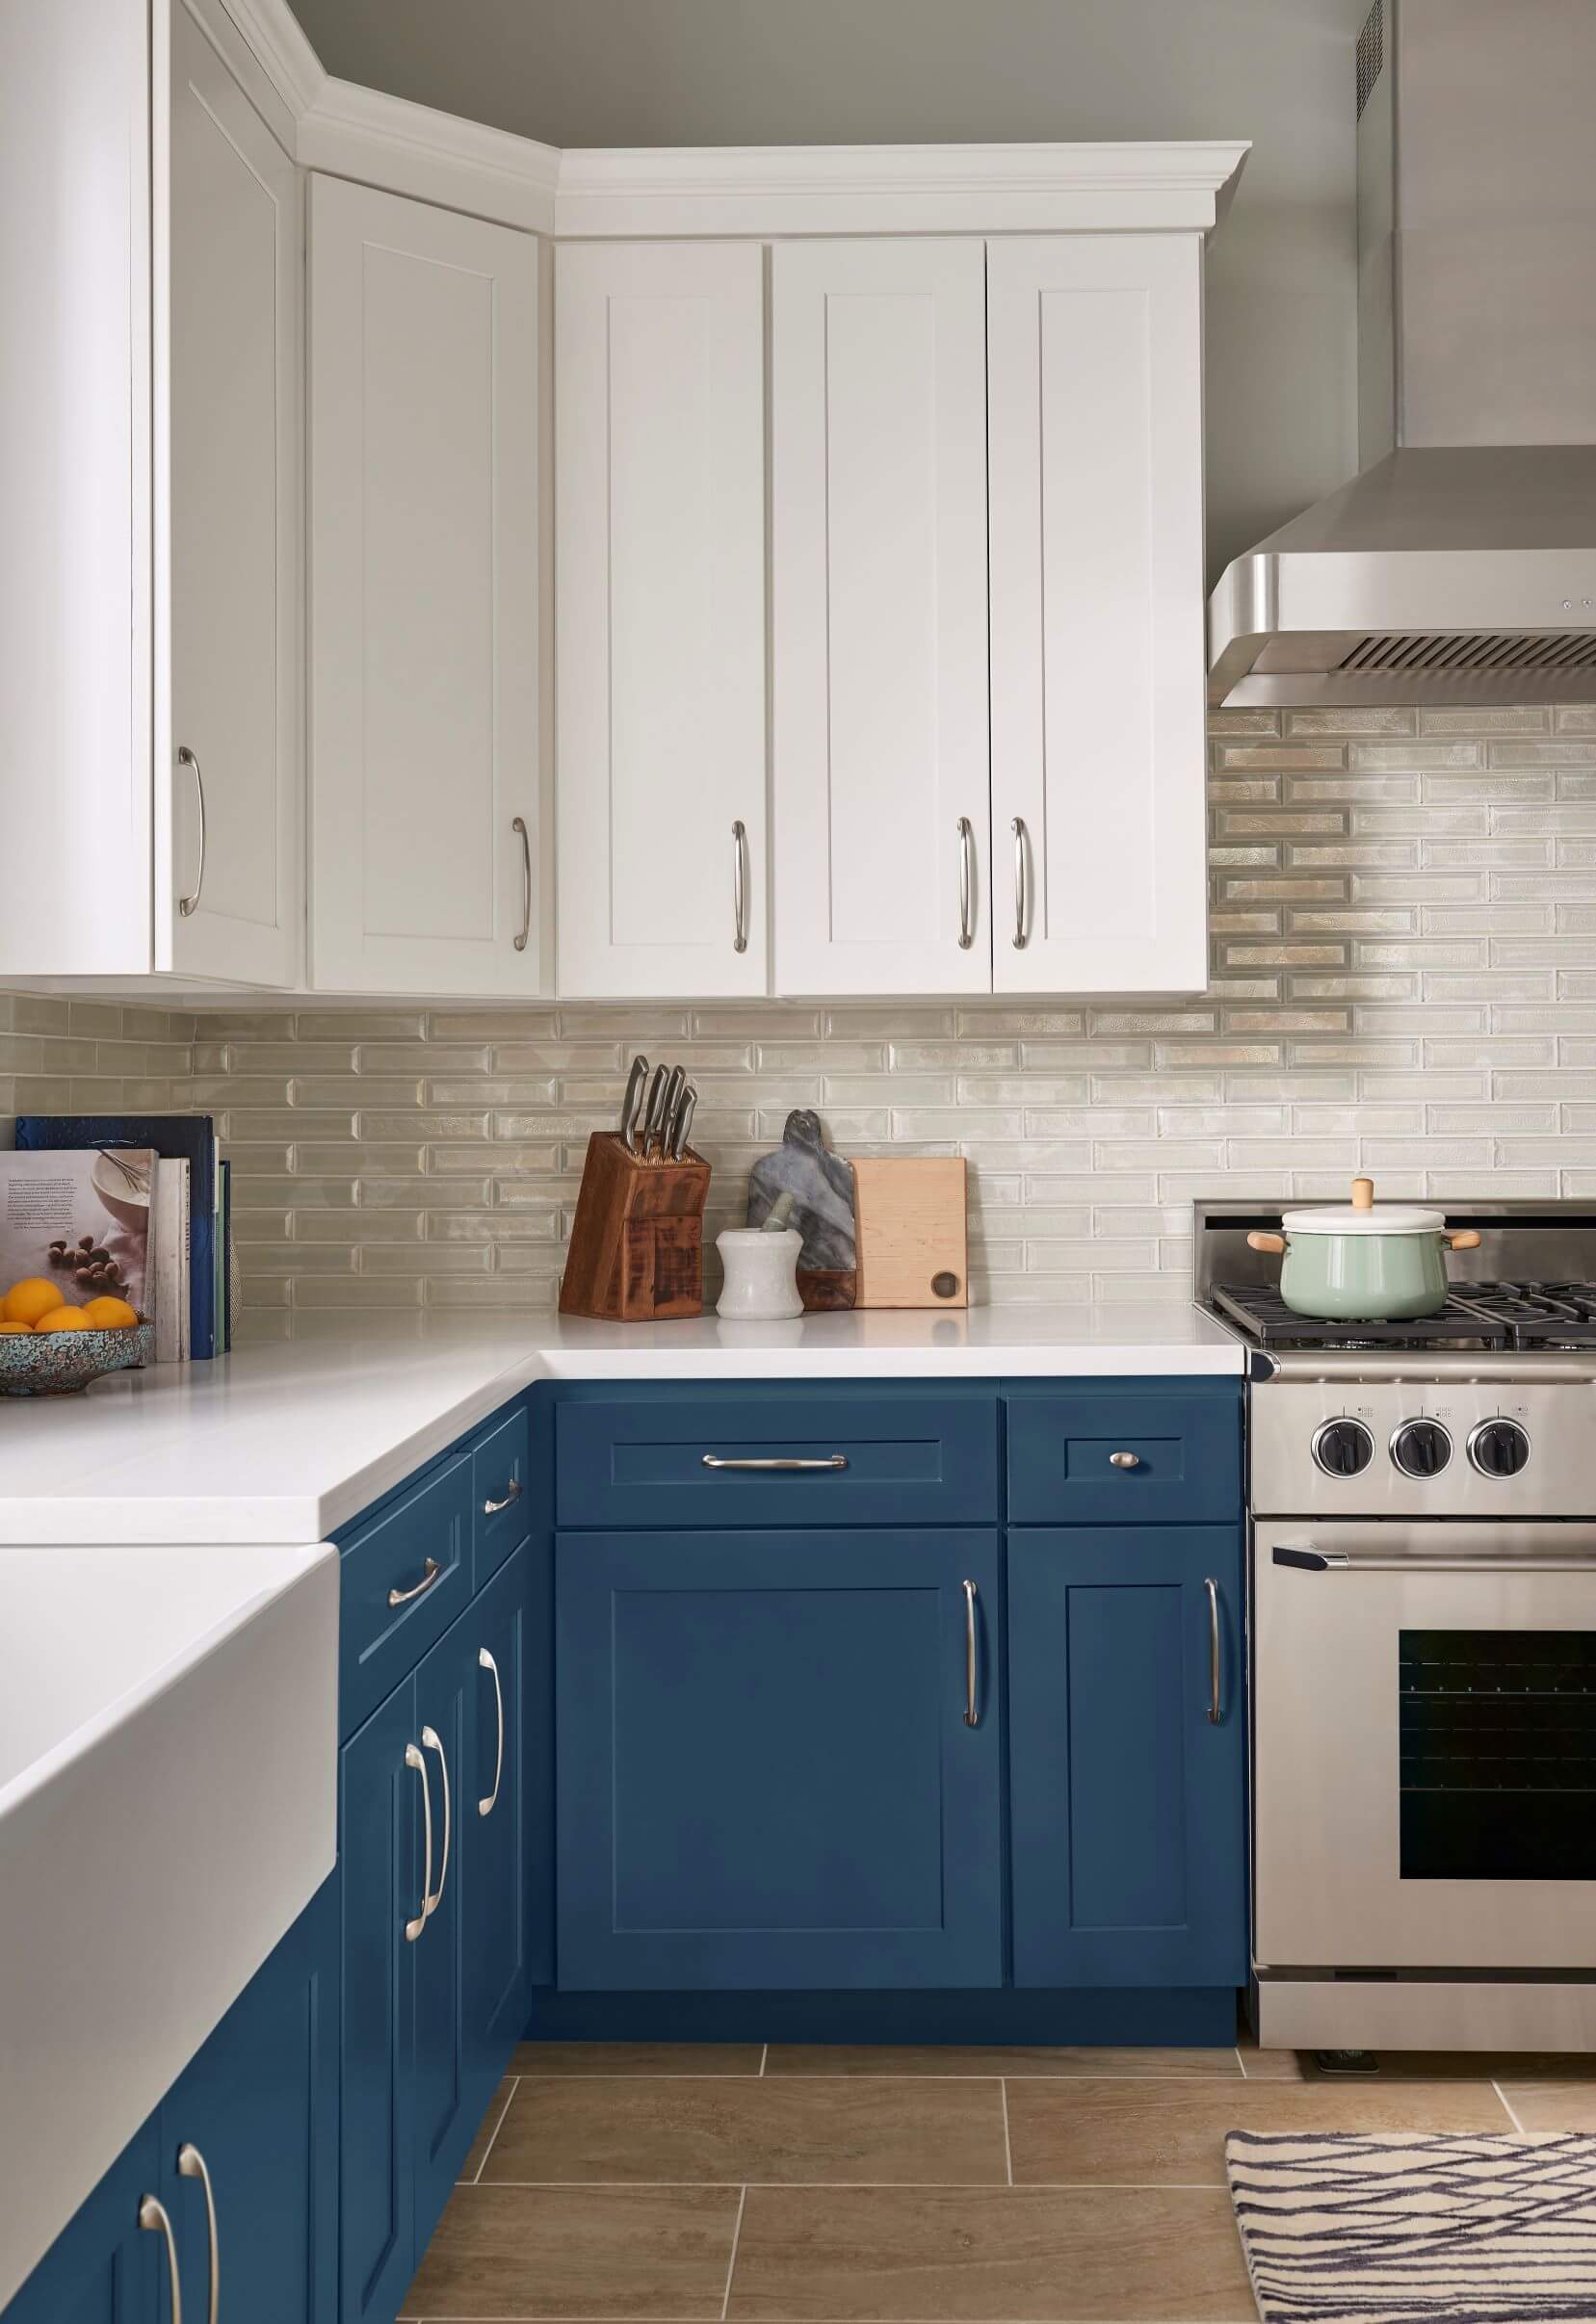 New Jersey In-Stock Cabinets in blue and white